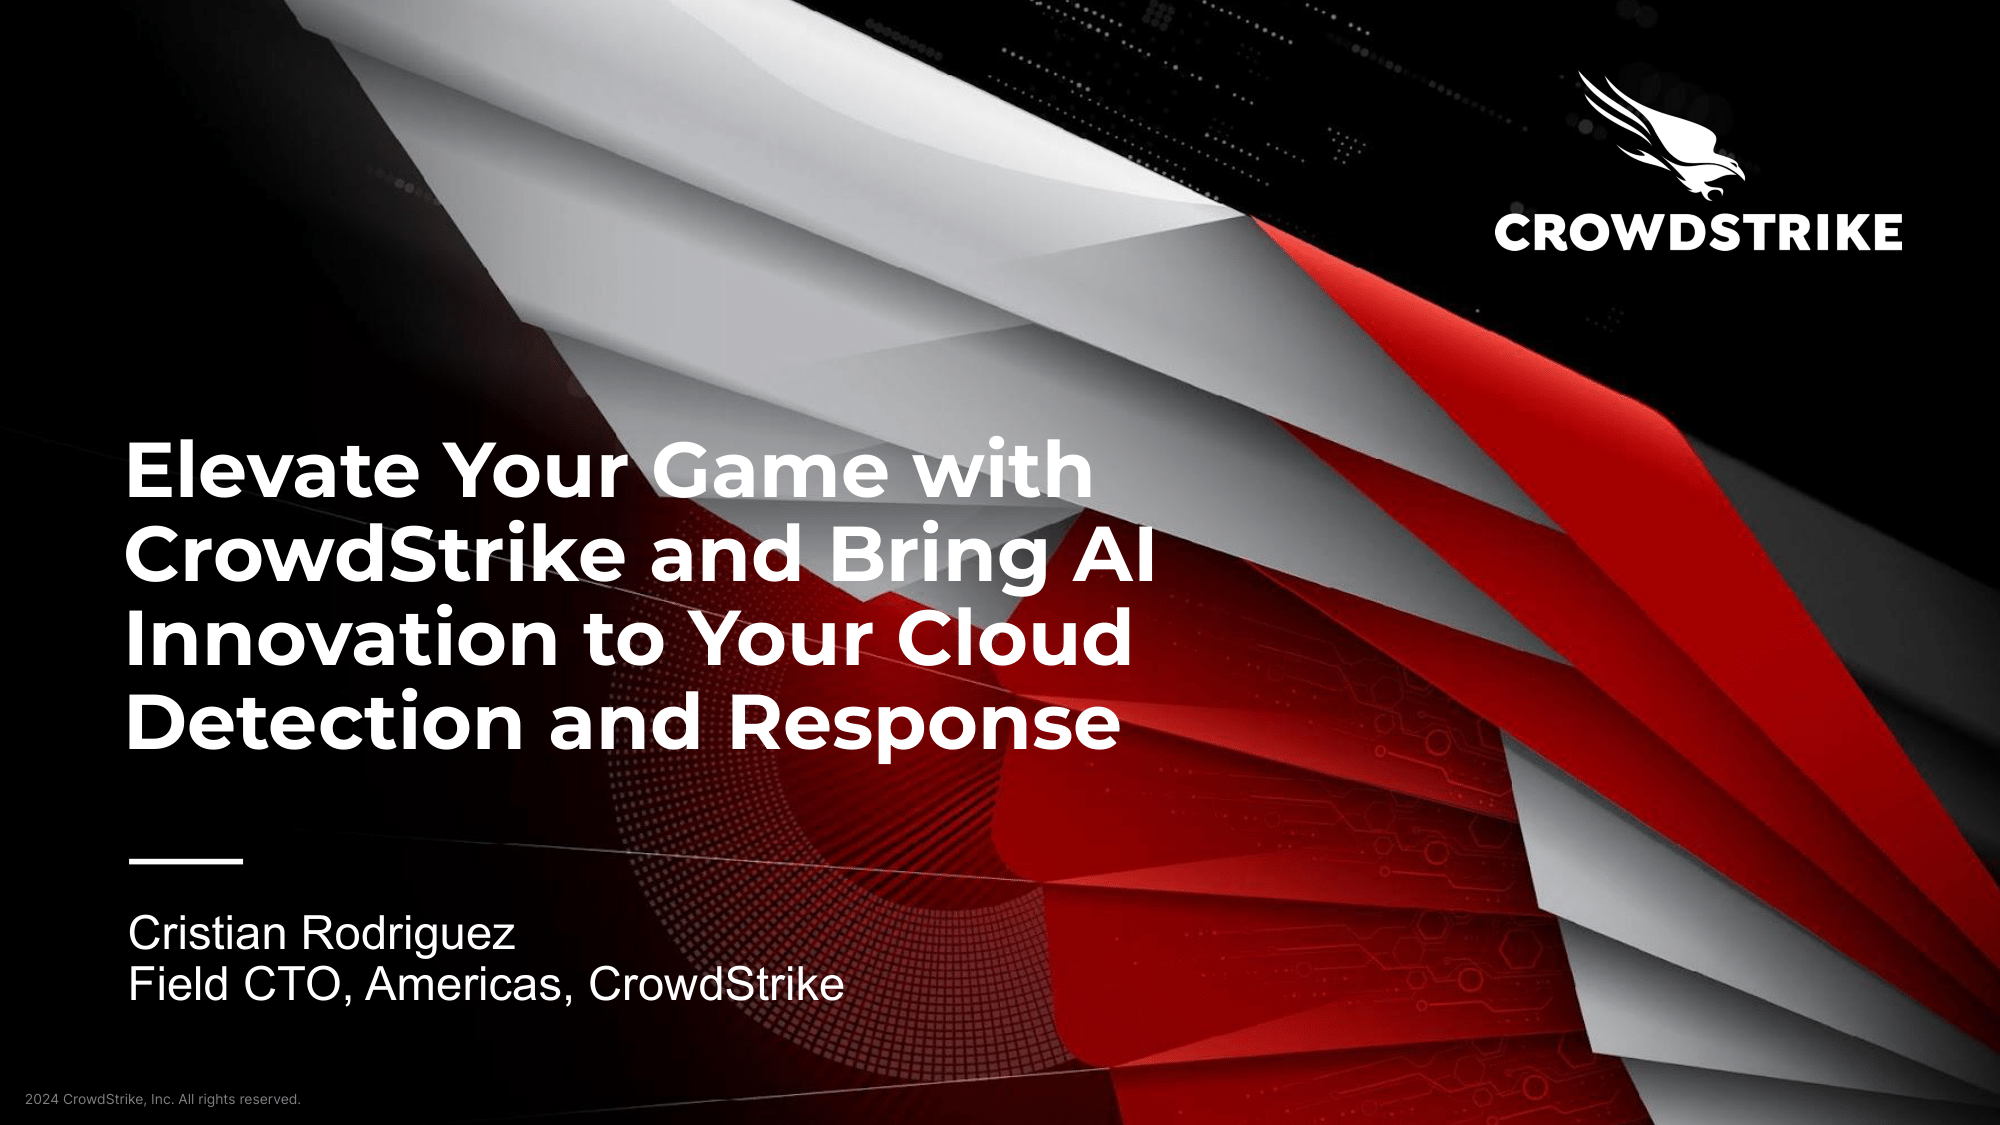 Elevate Your Game With Crowdstrike and Bring AI Innovation to Your Cloud Detection and Response